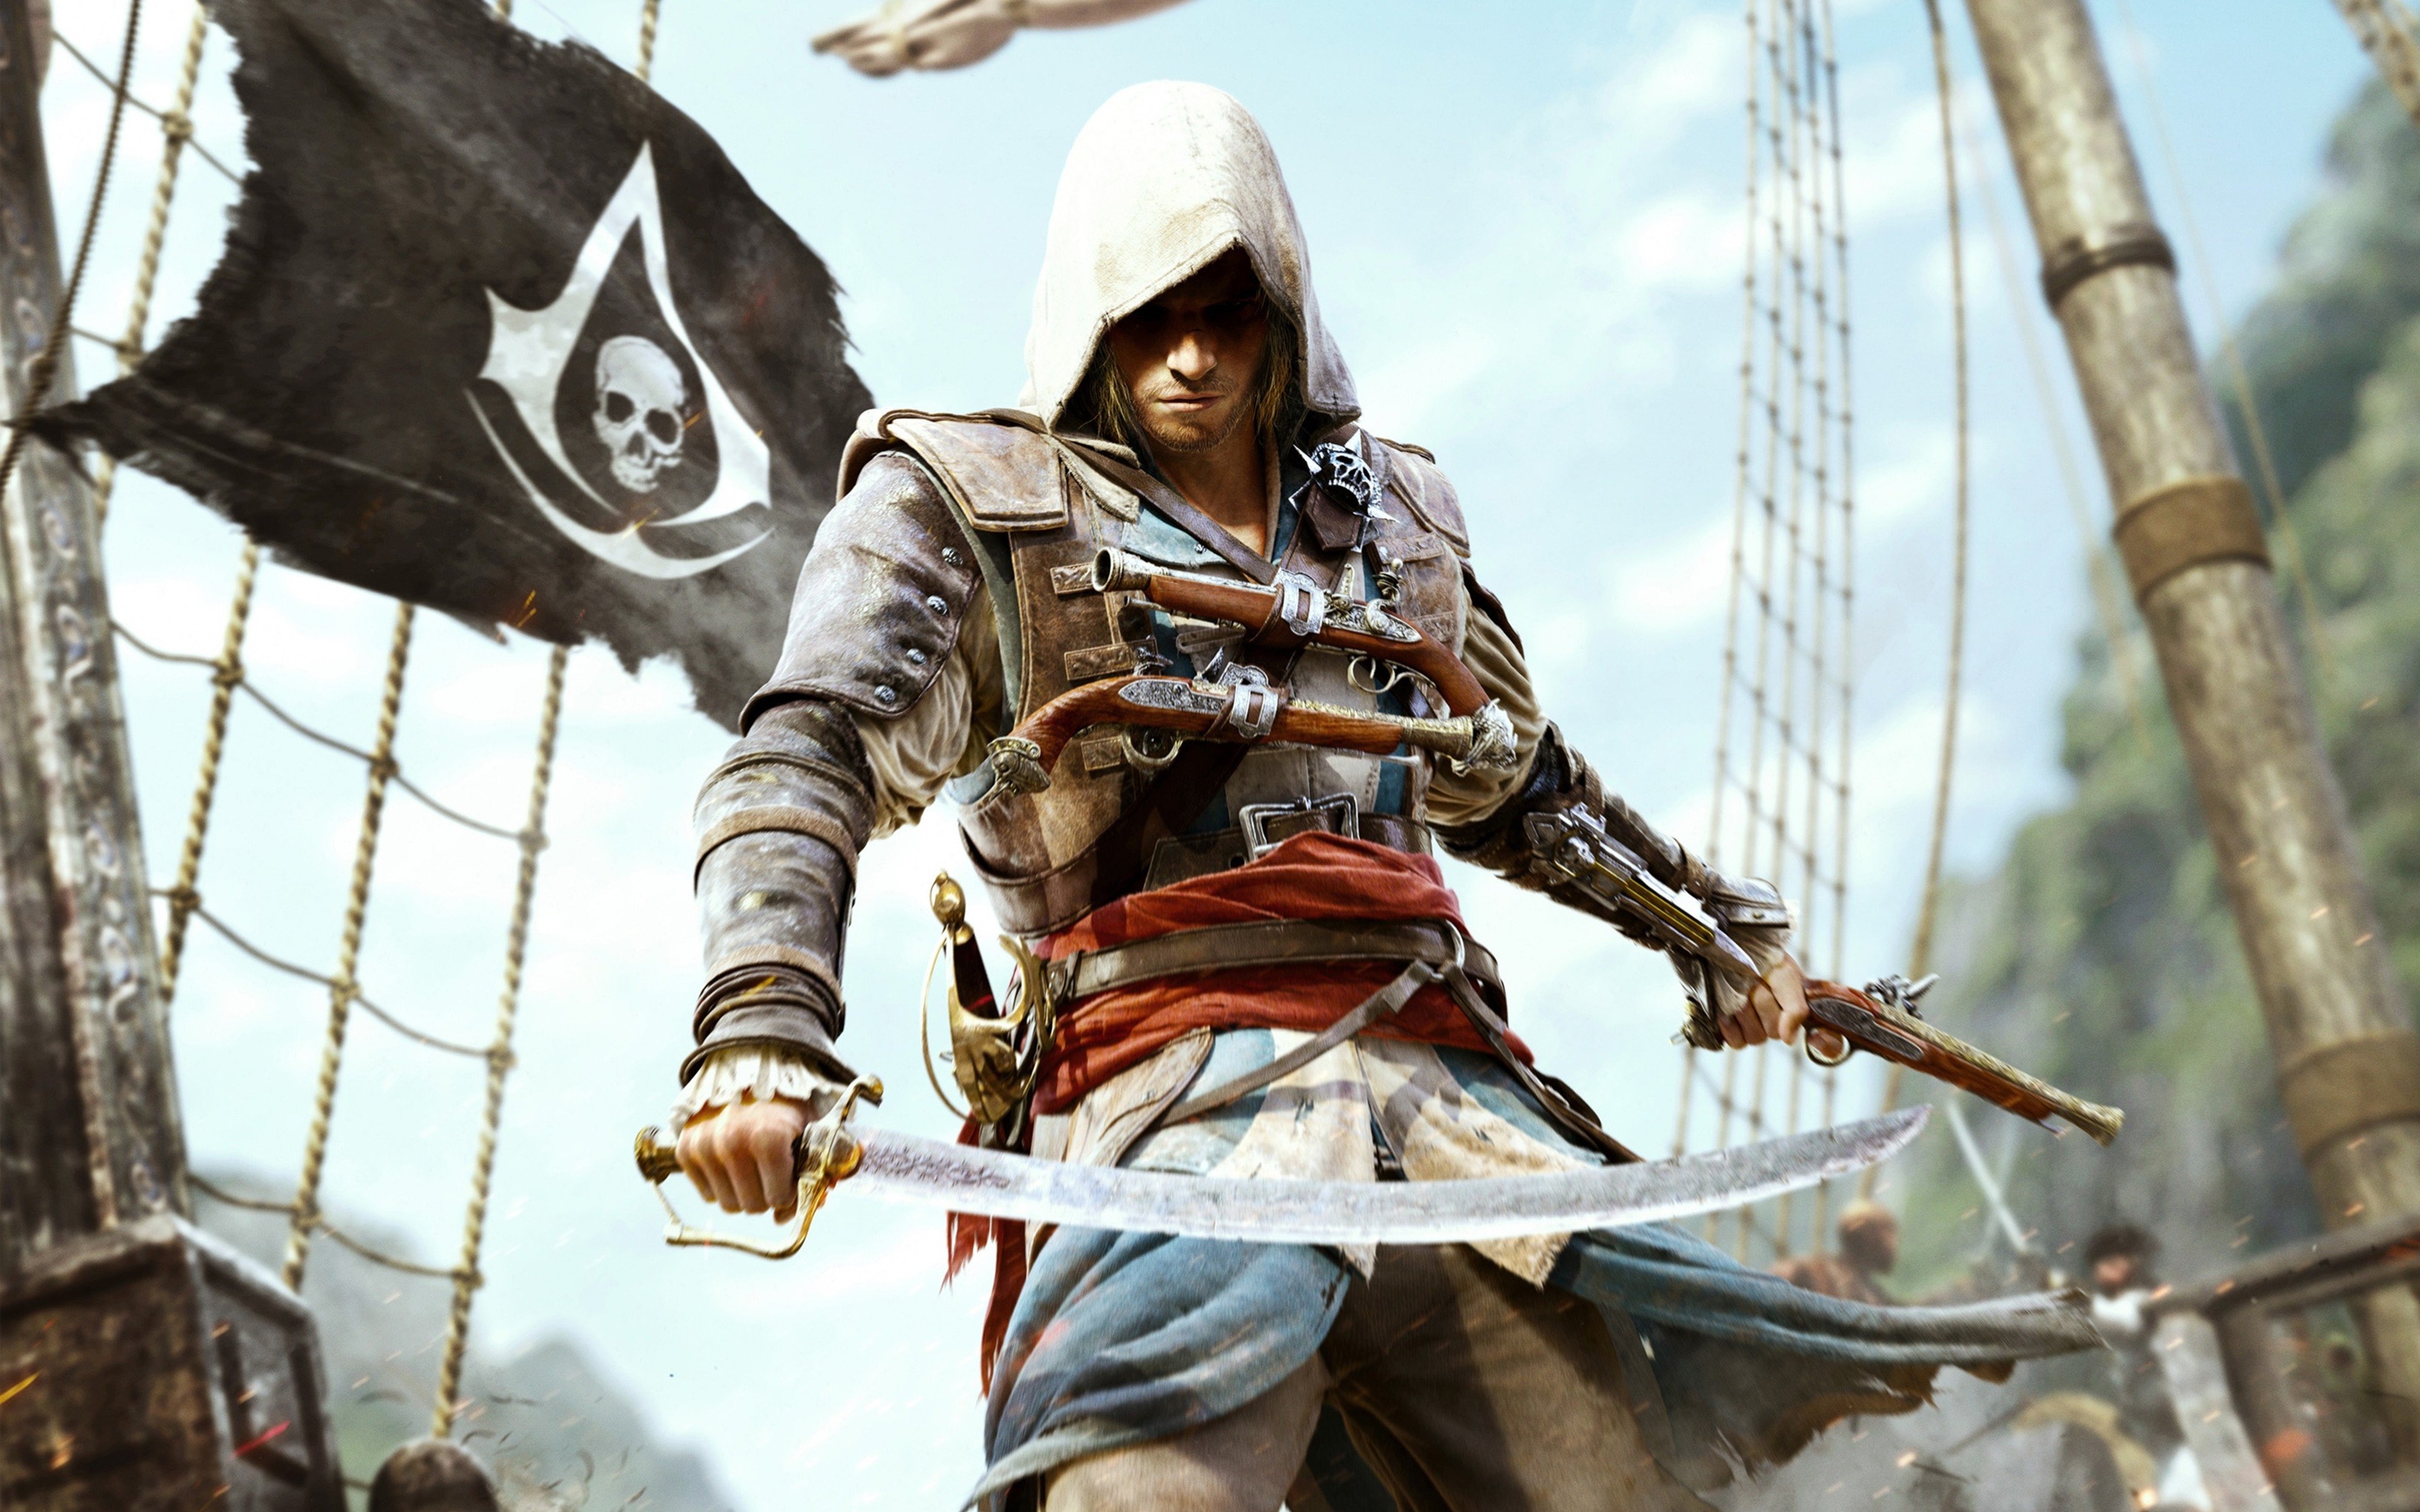 Assassin Creed 4 Background - 4000x2500 Wallpaper 